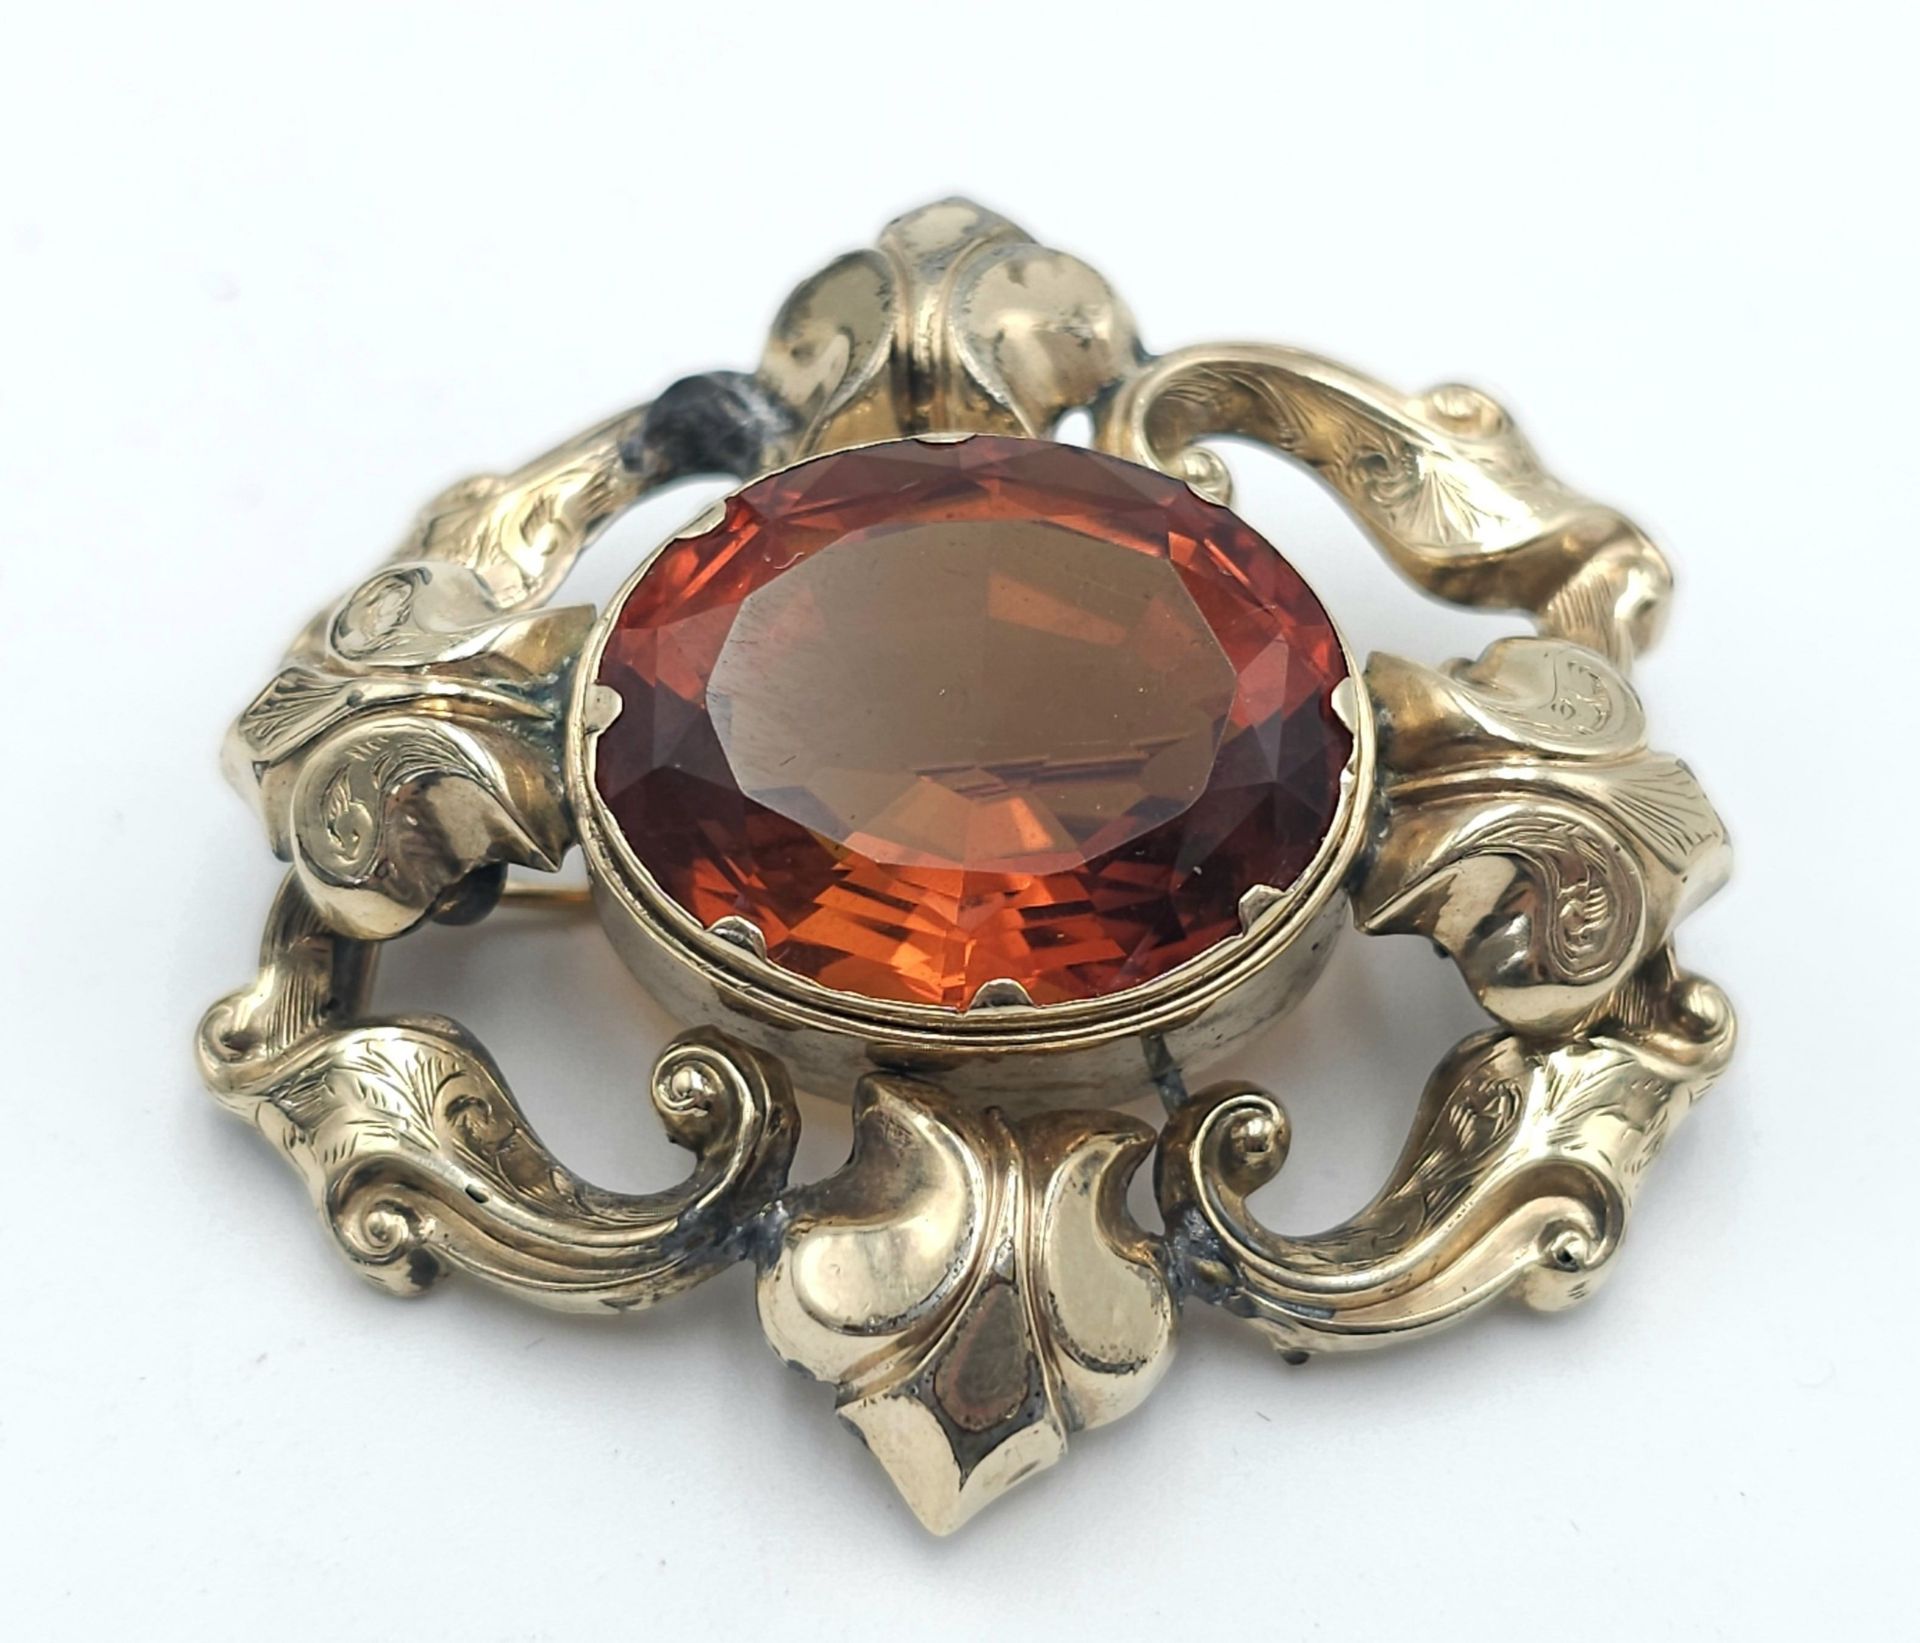 An Antique Large Citrine Brooch - Set in yellow metal. 5cm